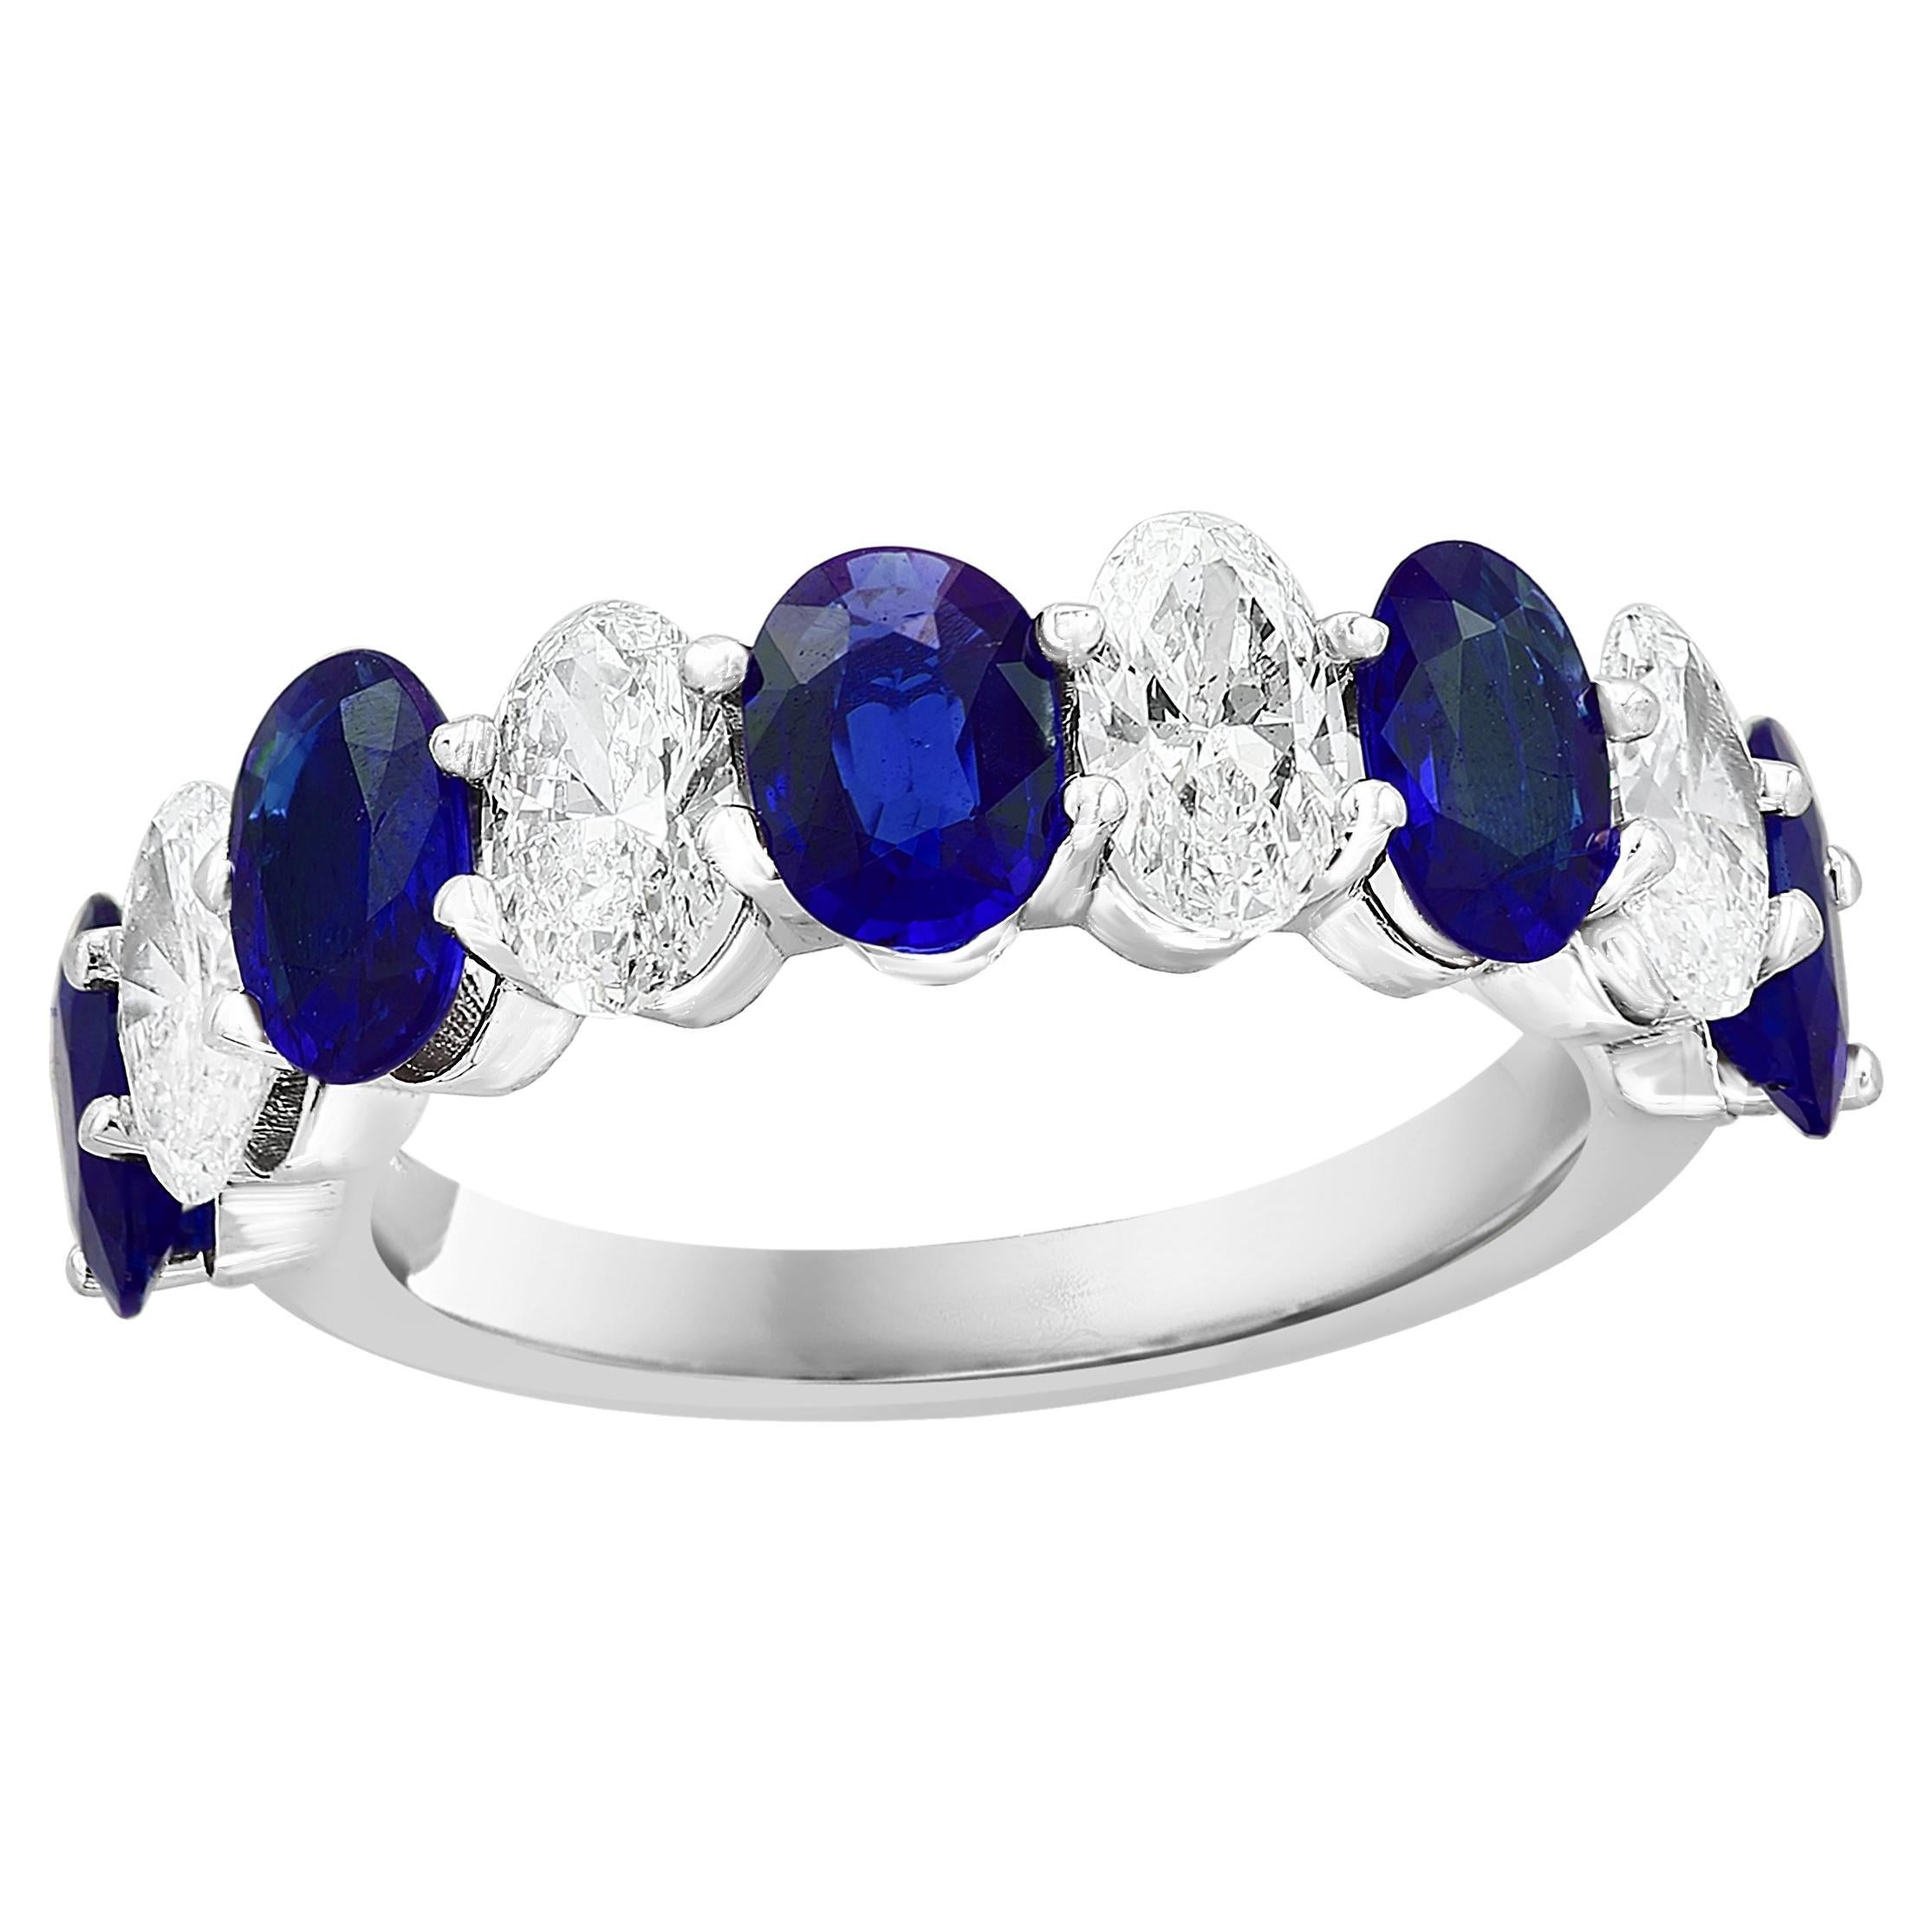 3.10 carat Oval Cut Sapphire Diamond Eternity Wedding Band in 14K White Gold For Sale